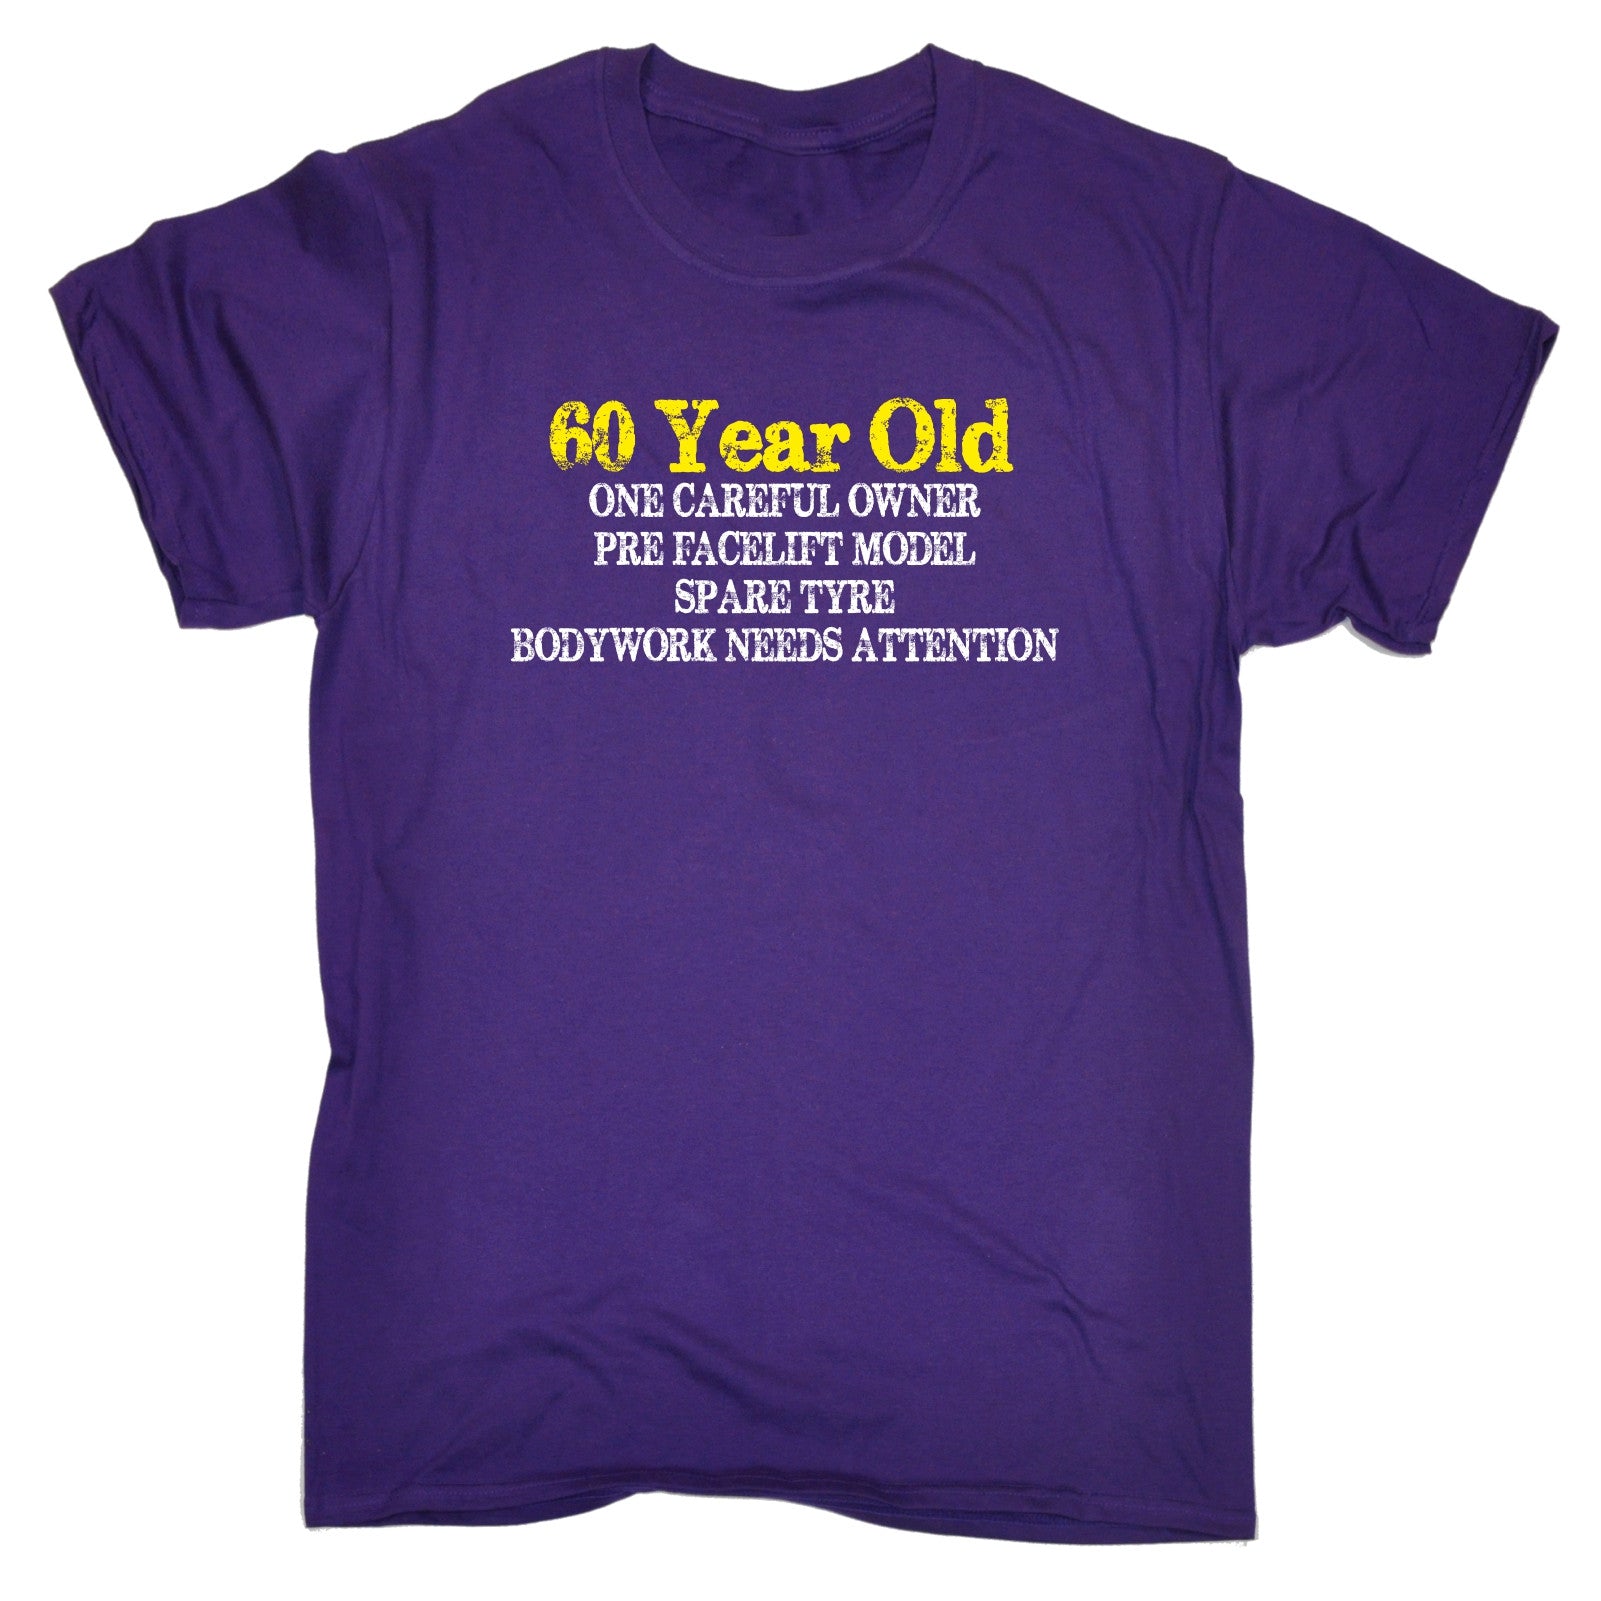 60 Year Old One Careful Owner T Shirt Tee Joke Funny Birthday T 